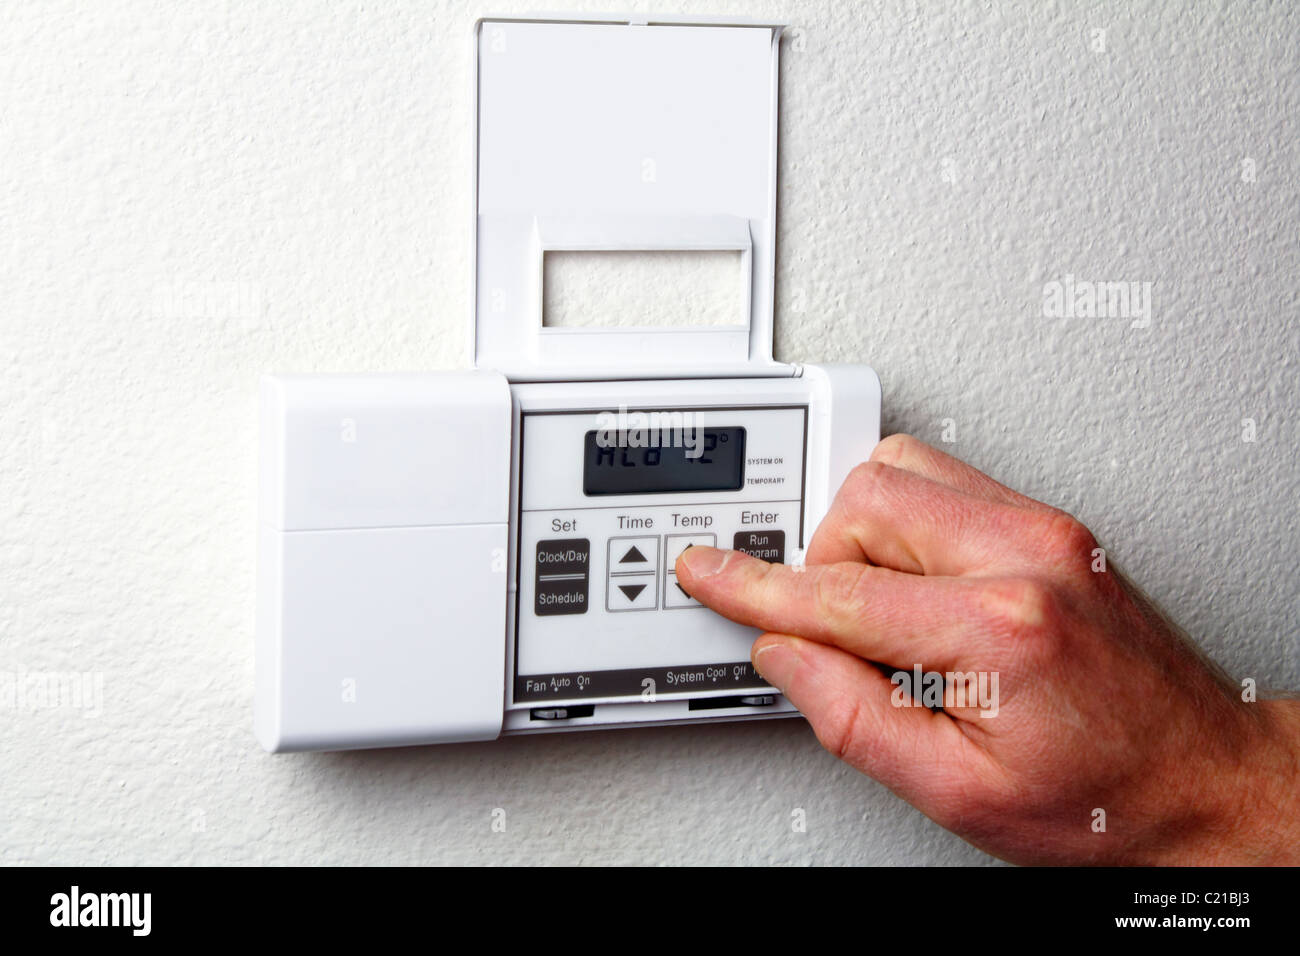 HVAC thermostat of a home heating energy system that is energy efficient. Fingers pushing controls on heating and cooling digital wall panel display. Stock Photo